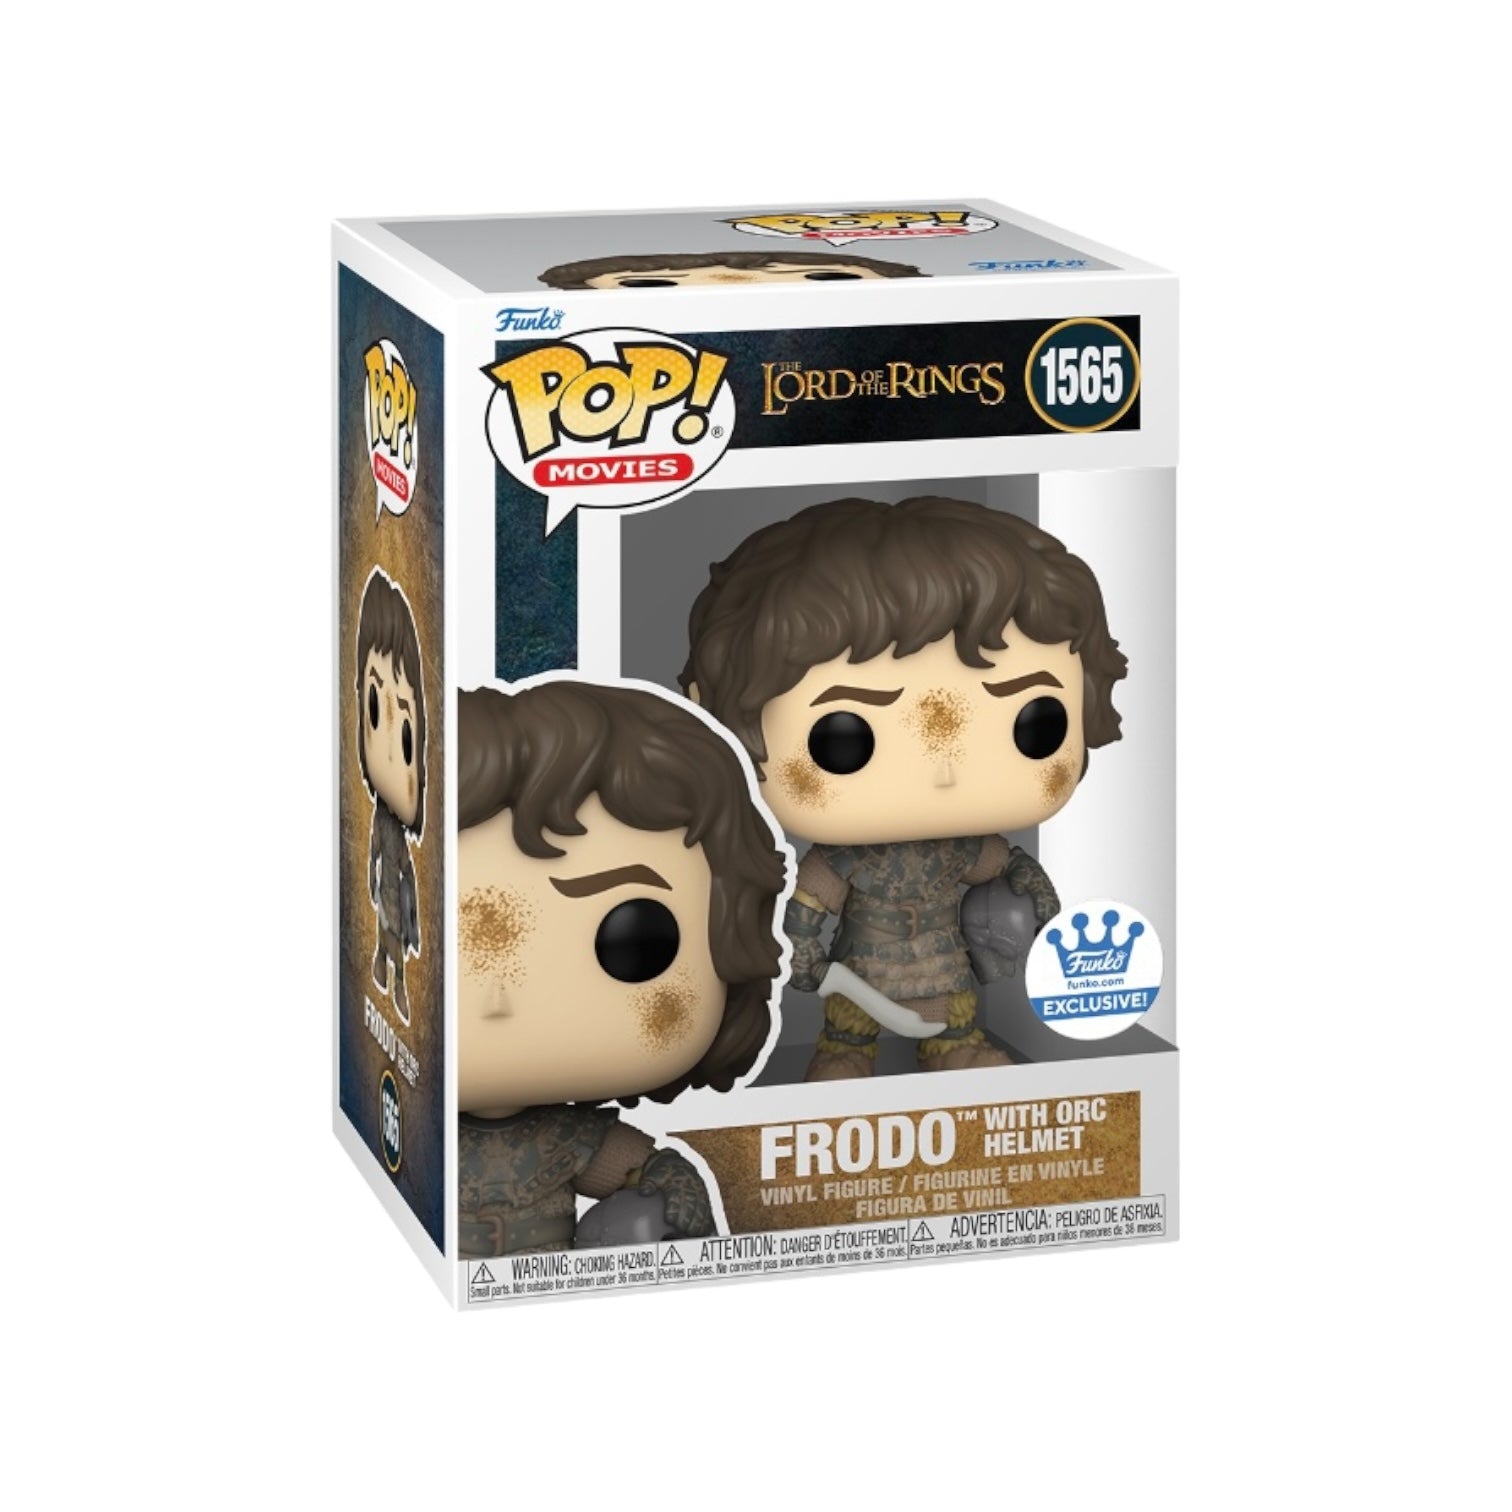 Frodo with Orc Helmet #1565 Funko Pop! - The Lord Of The Rings - Funko Shop Exclusive